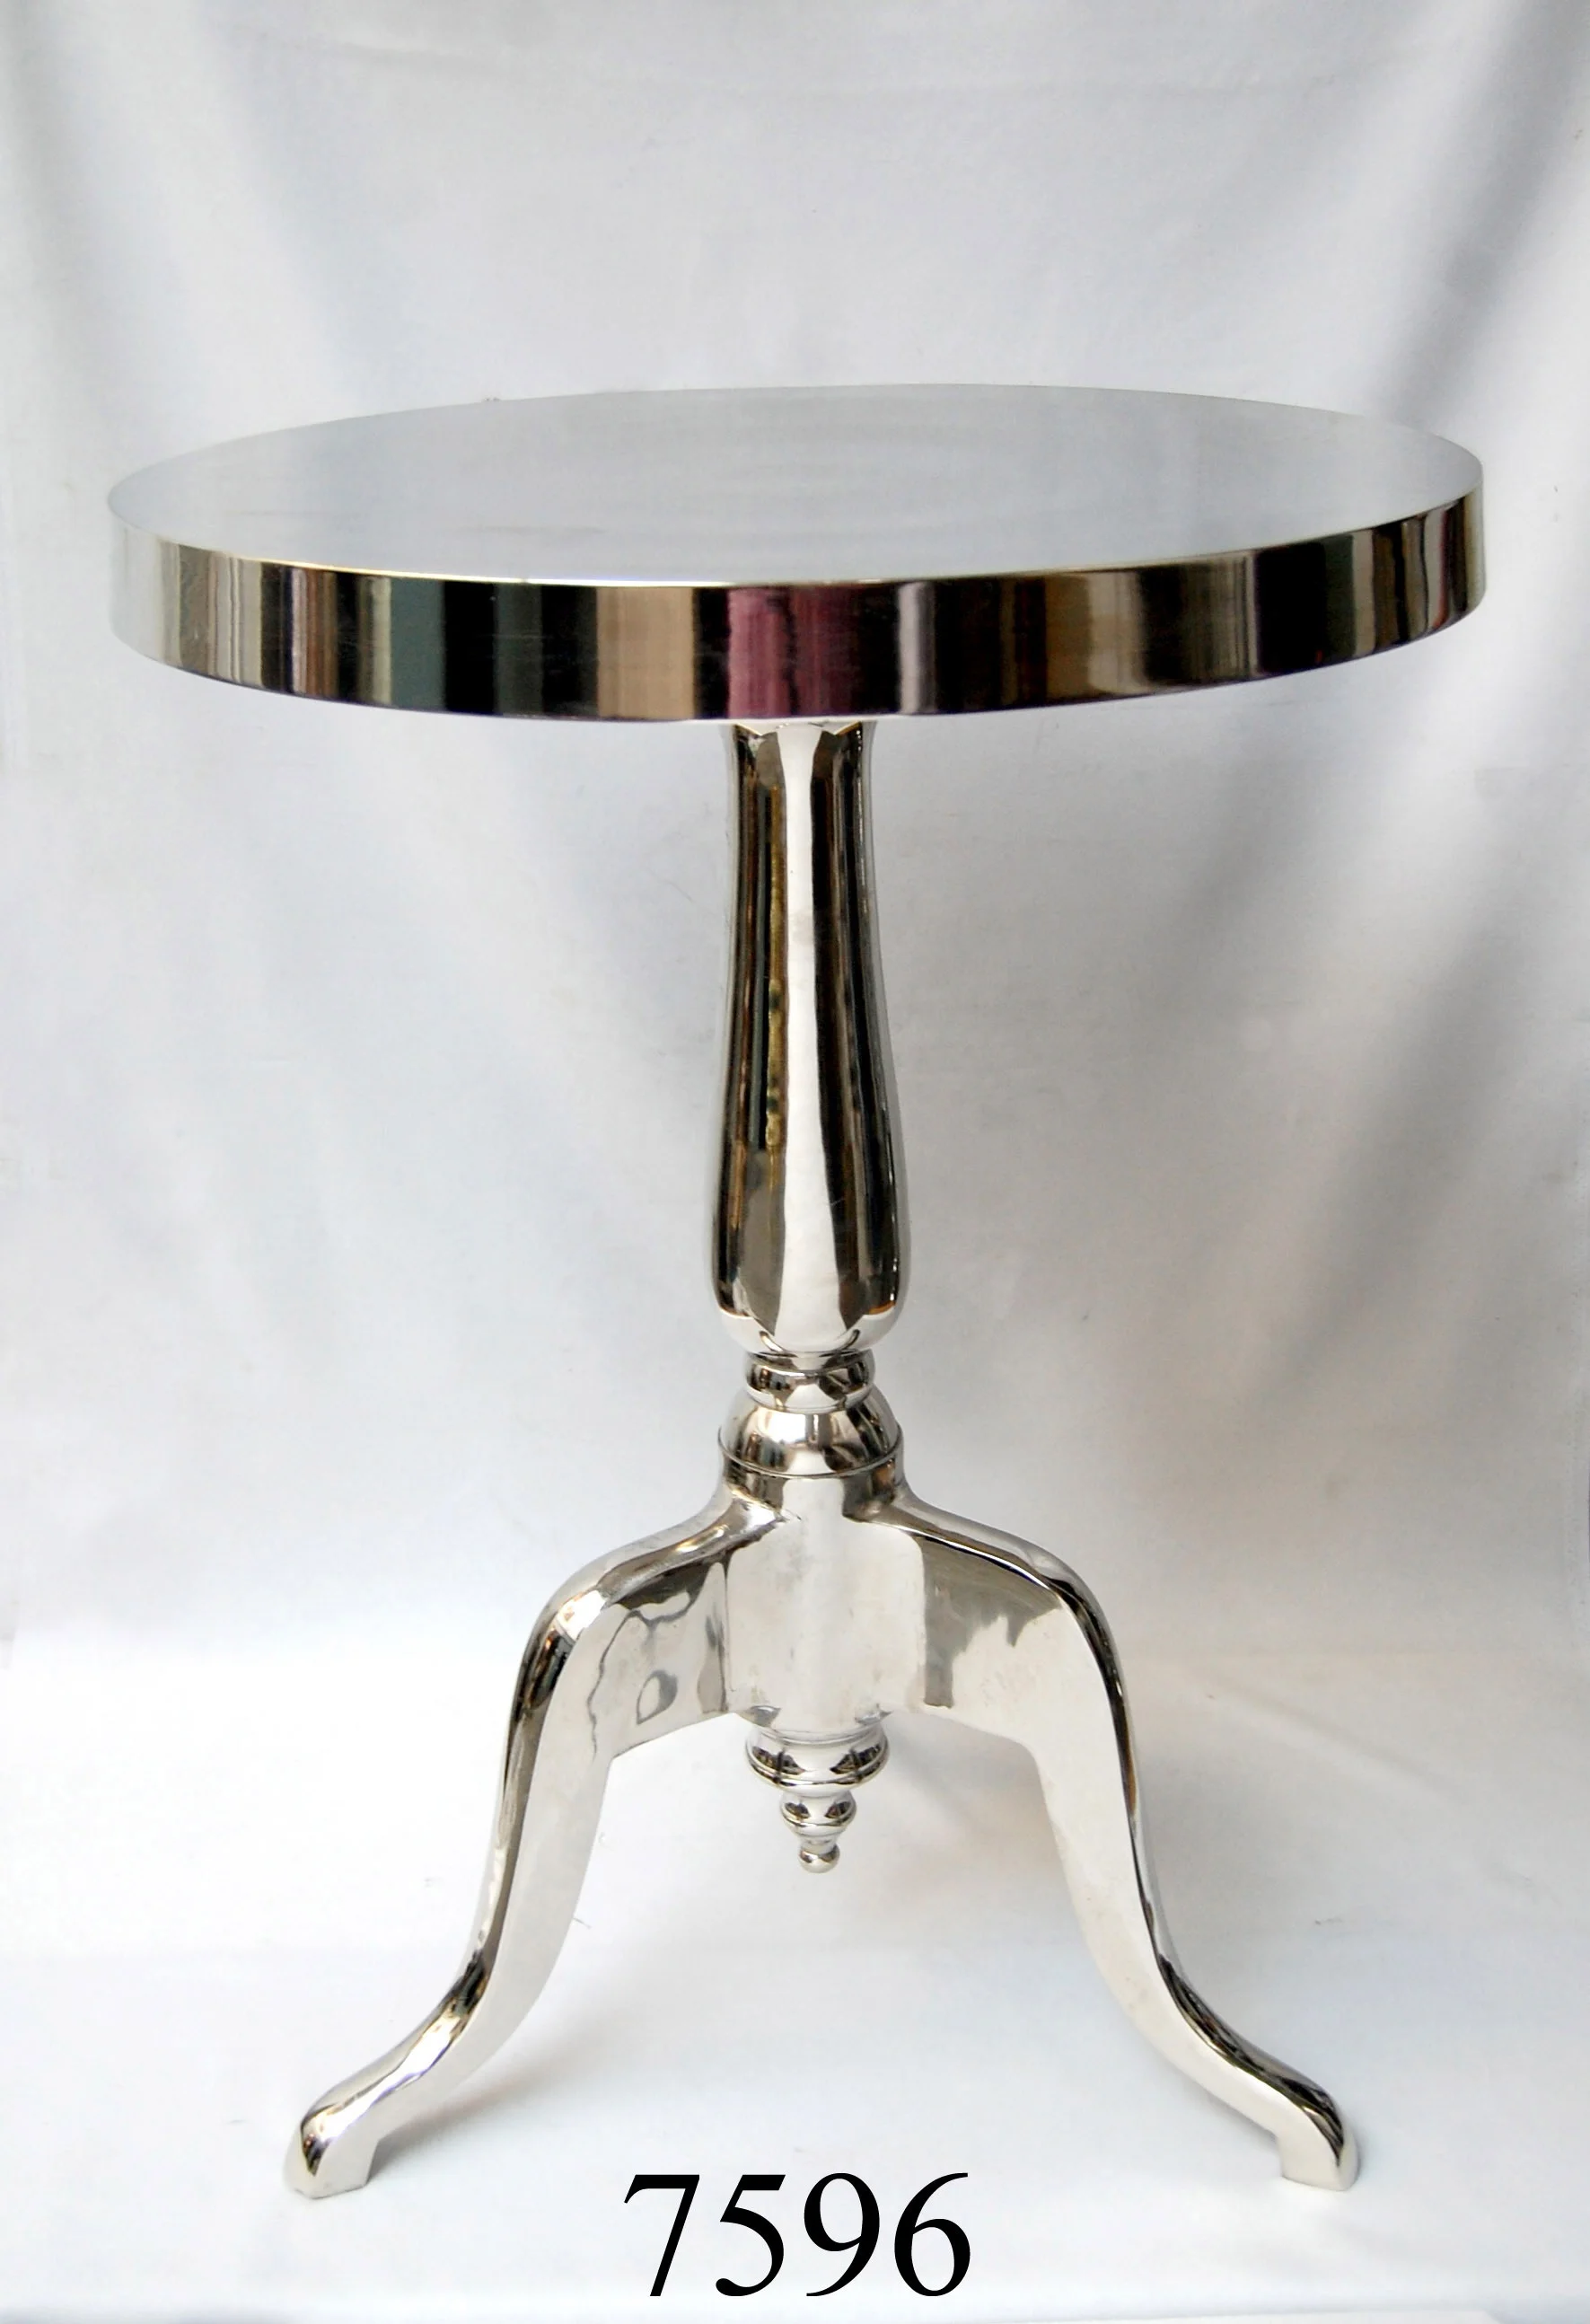 New Arrival Metal Coffee table standard size Plain Polished Tall Side Table for Office and living room decorations